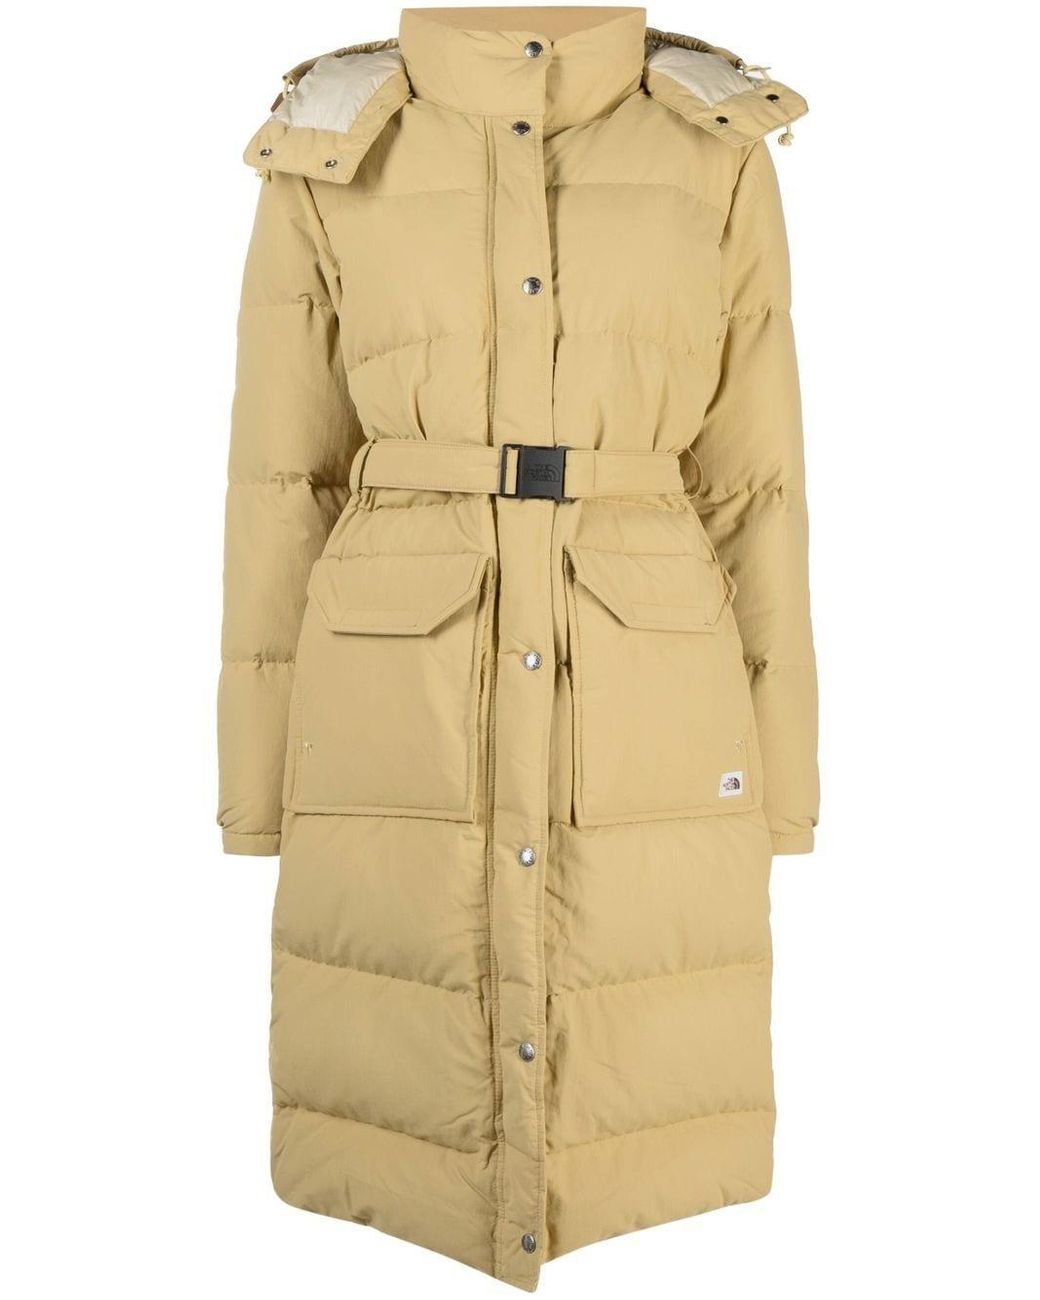 The North Face Sierra Long Down Parka Coat in Natural | Lyst Canada